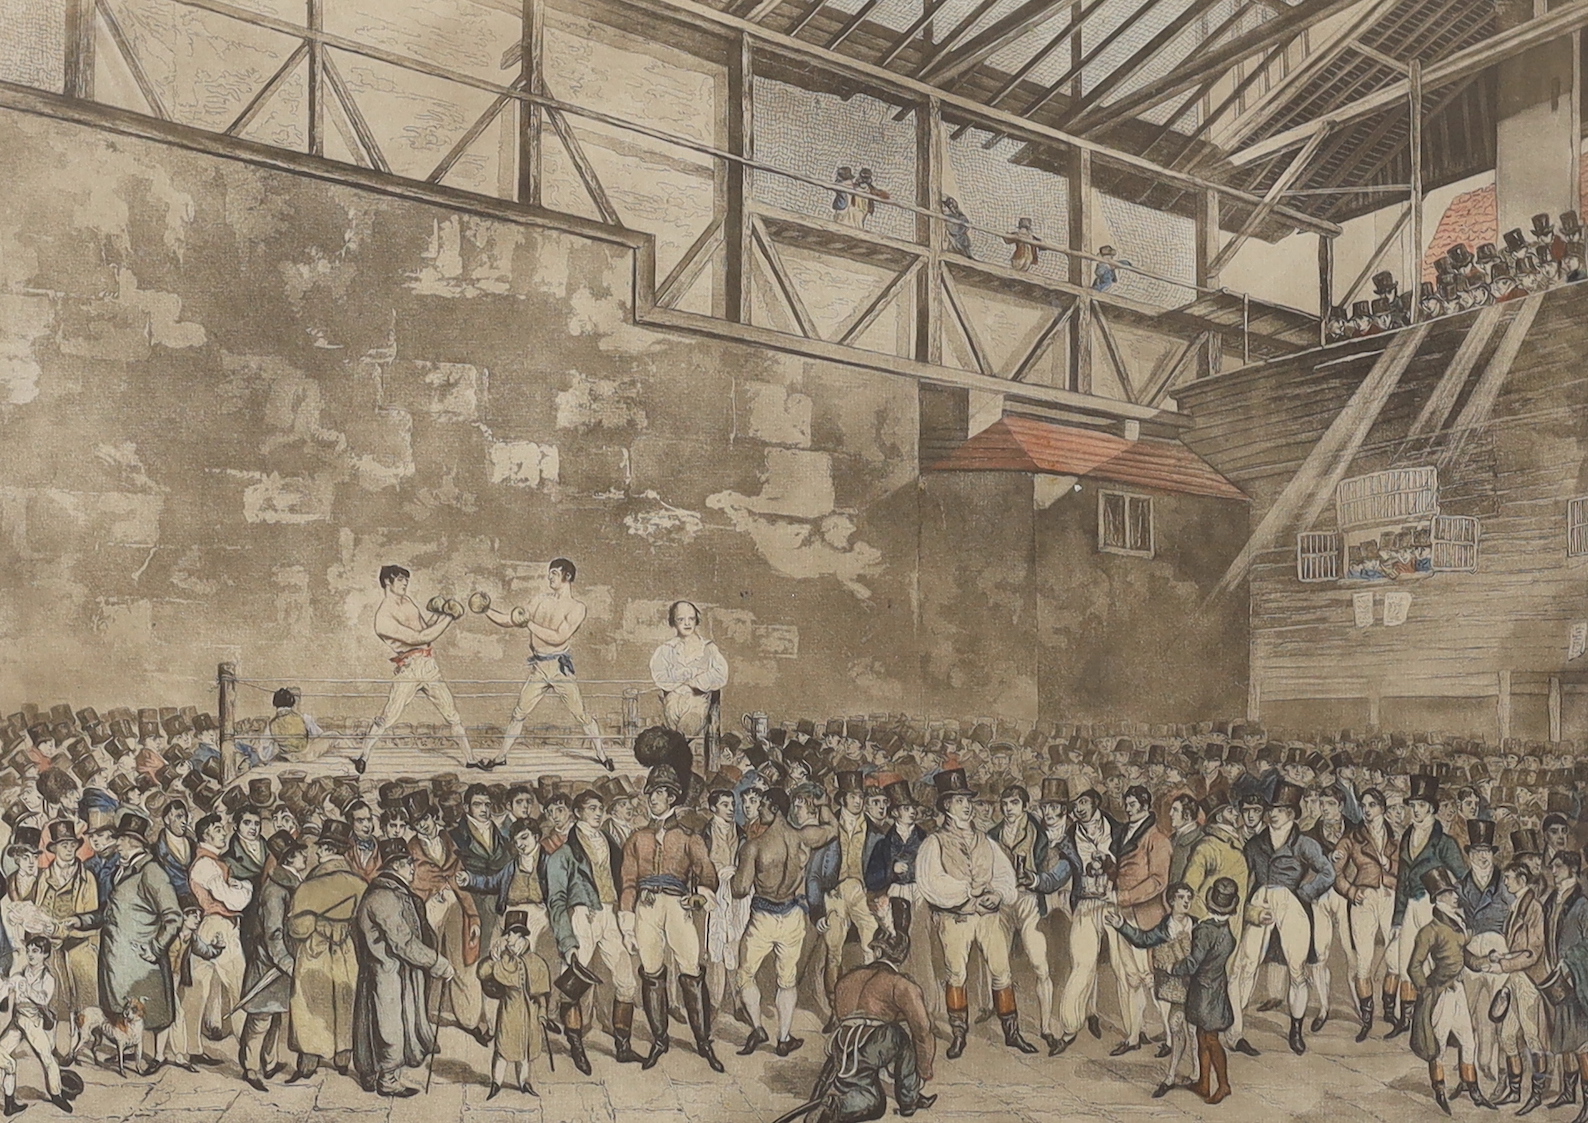 Charles Turner (1774-1857) after T. Blake, colour engraving, Boxing interest 'The interior of the Fives Court', 42 x 56cm